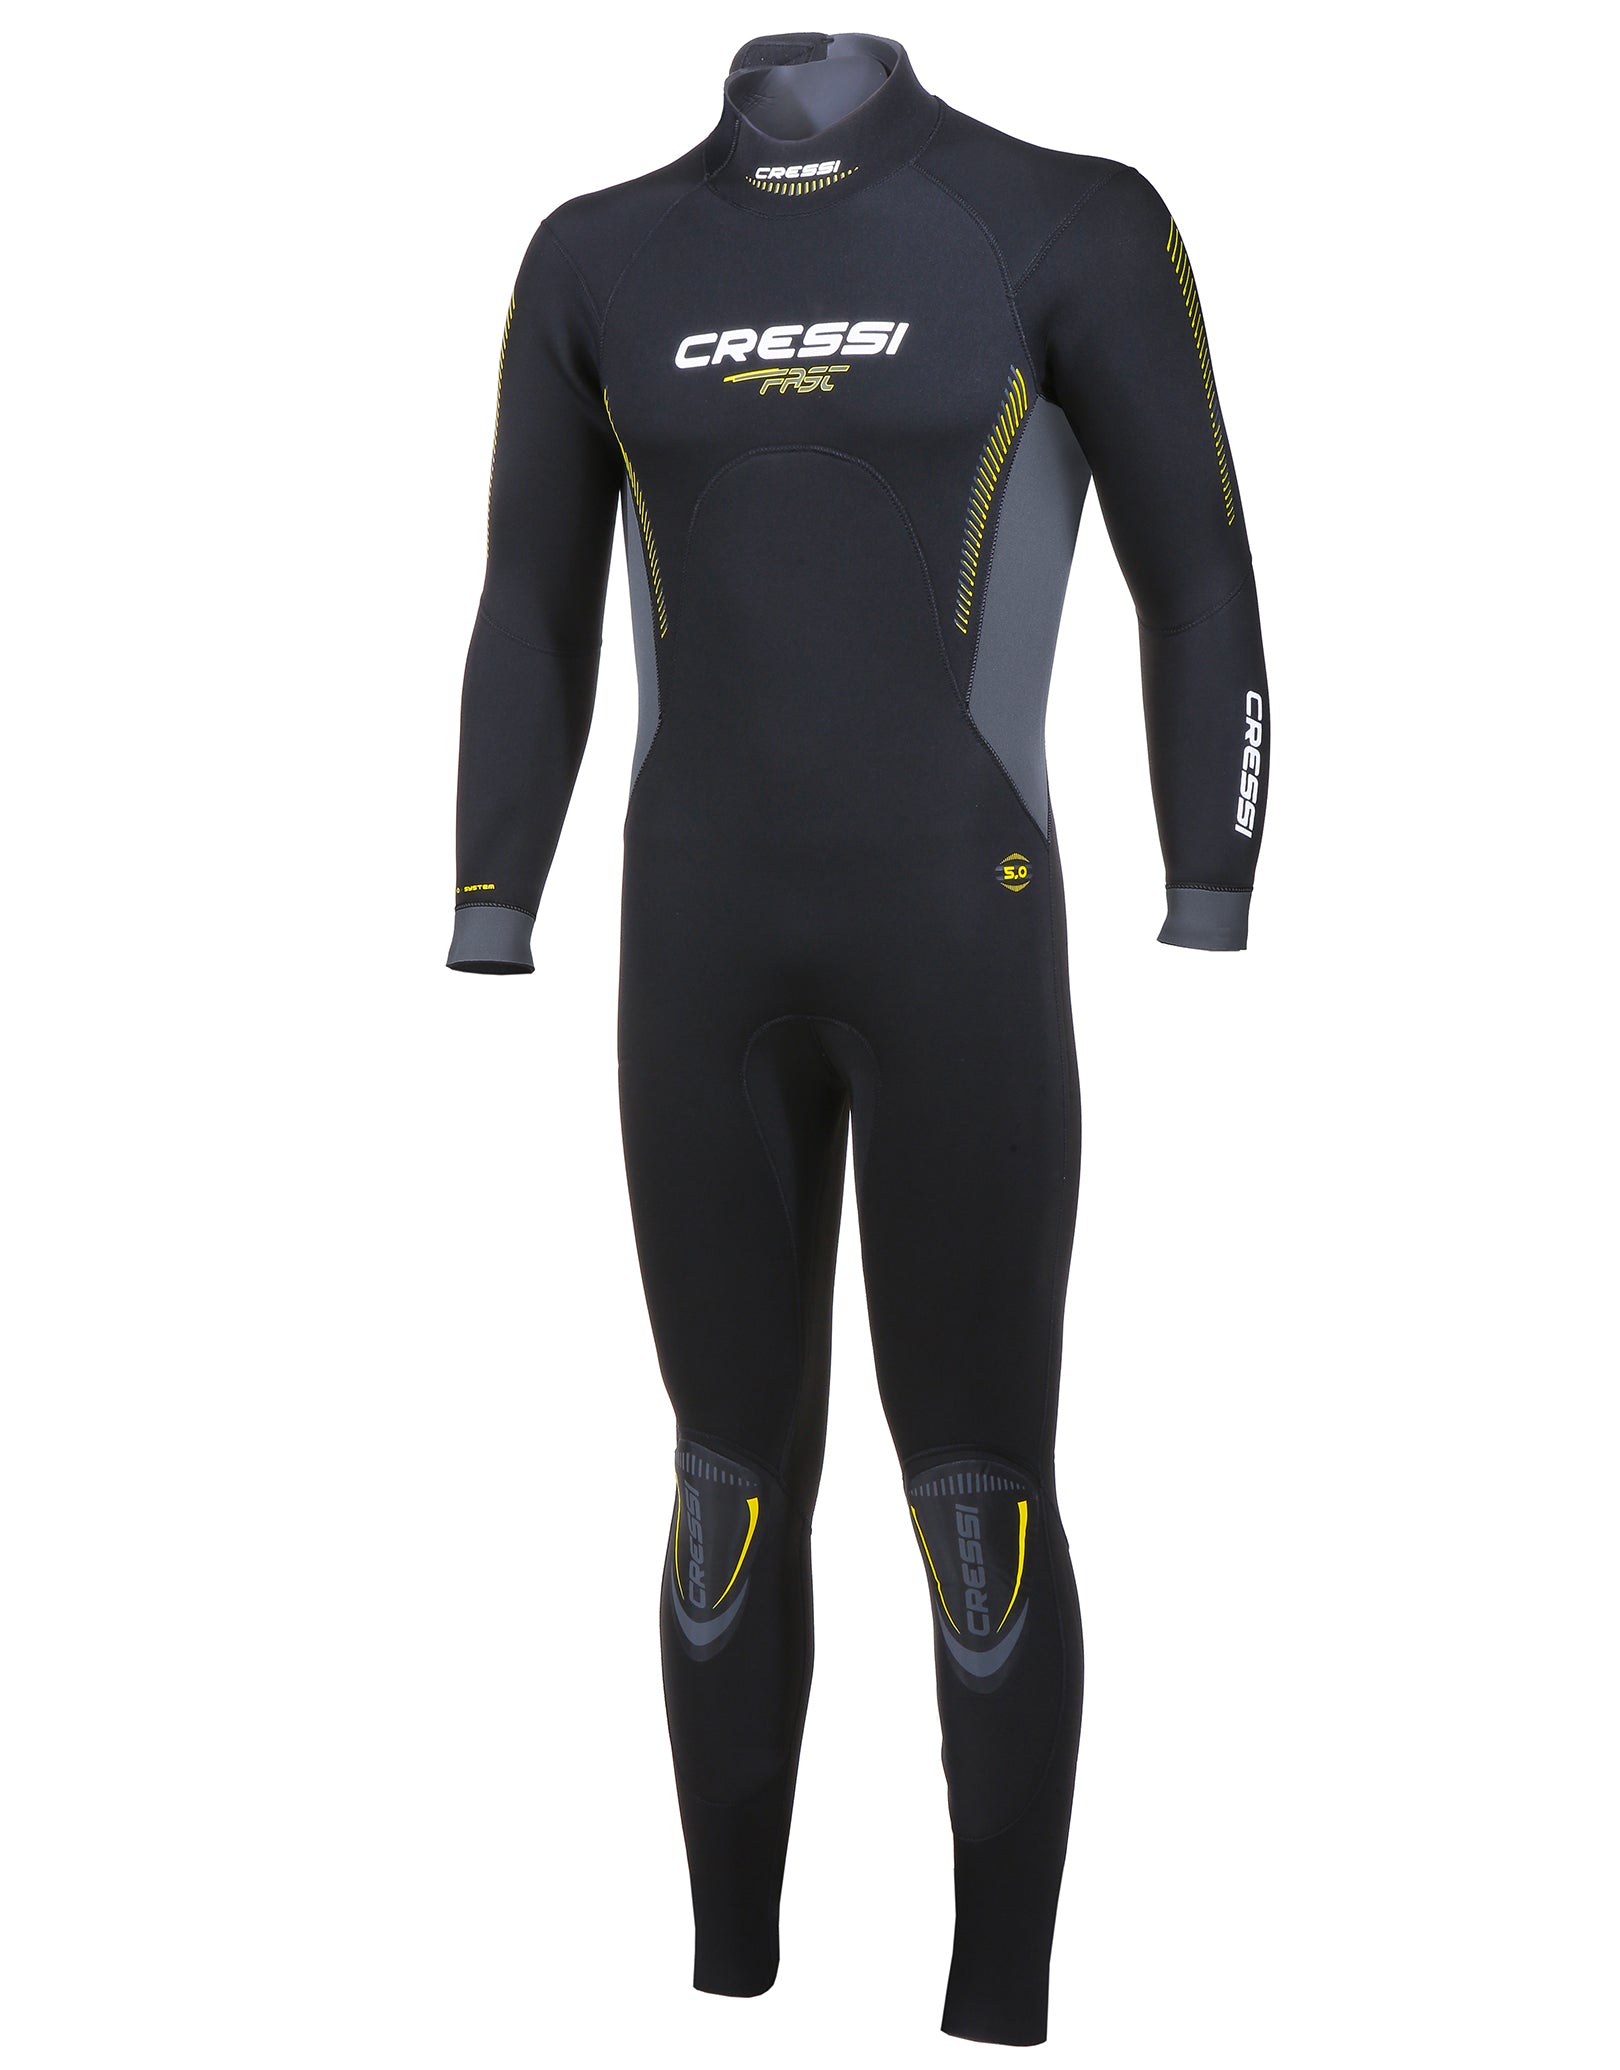 Cressi Wetsuit Size Chart